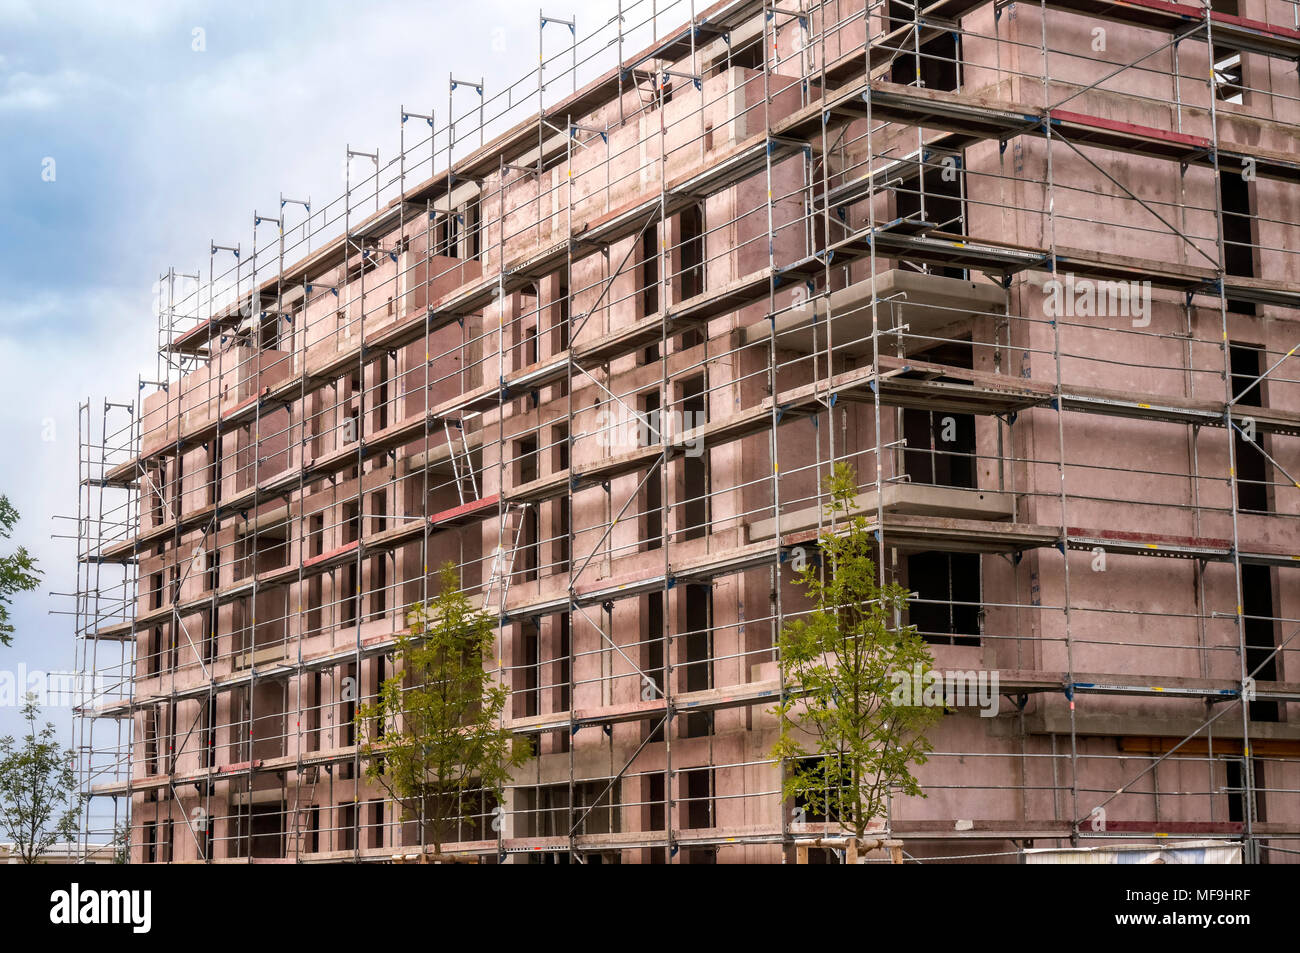 Shell of an apartment building with scaffolding Stock Photo